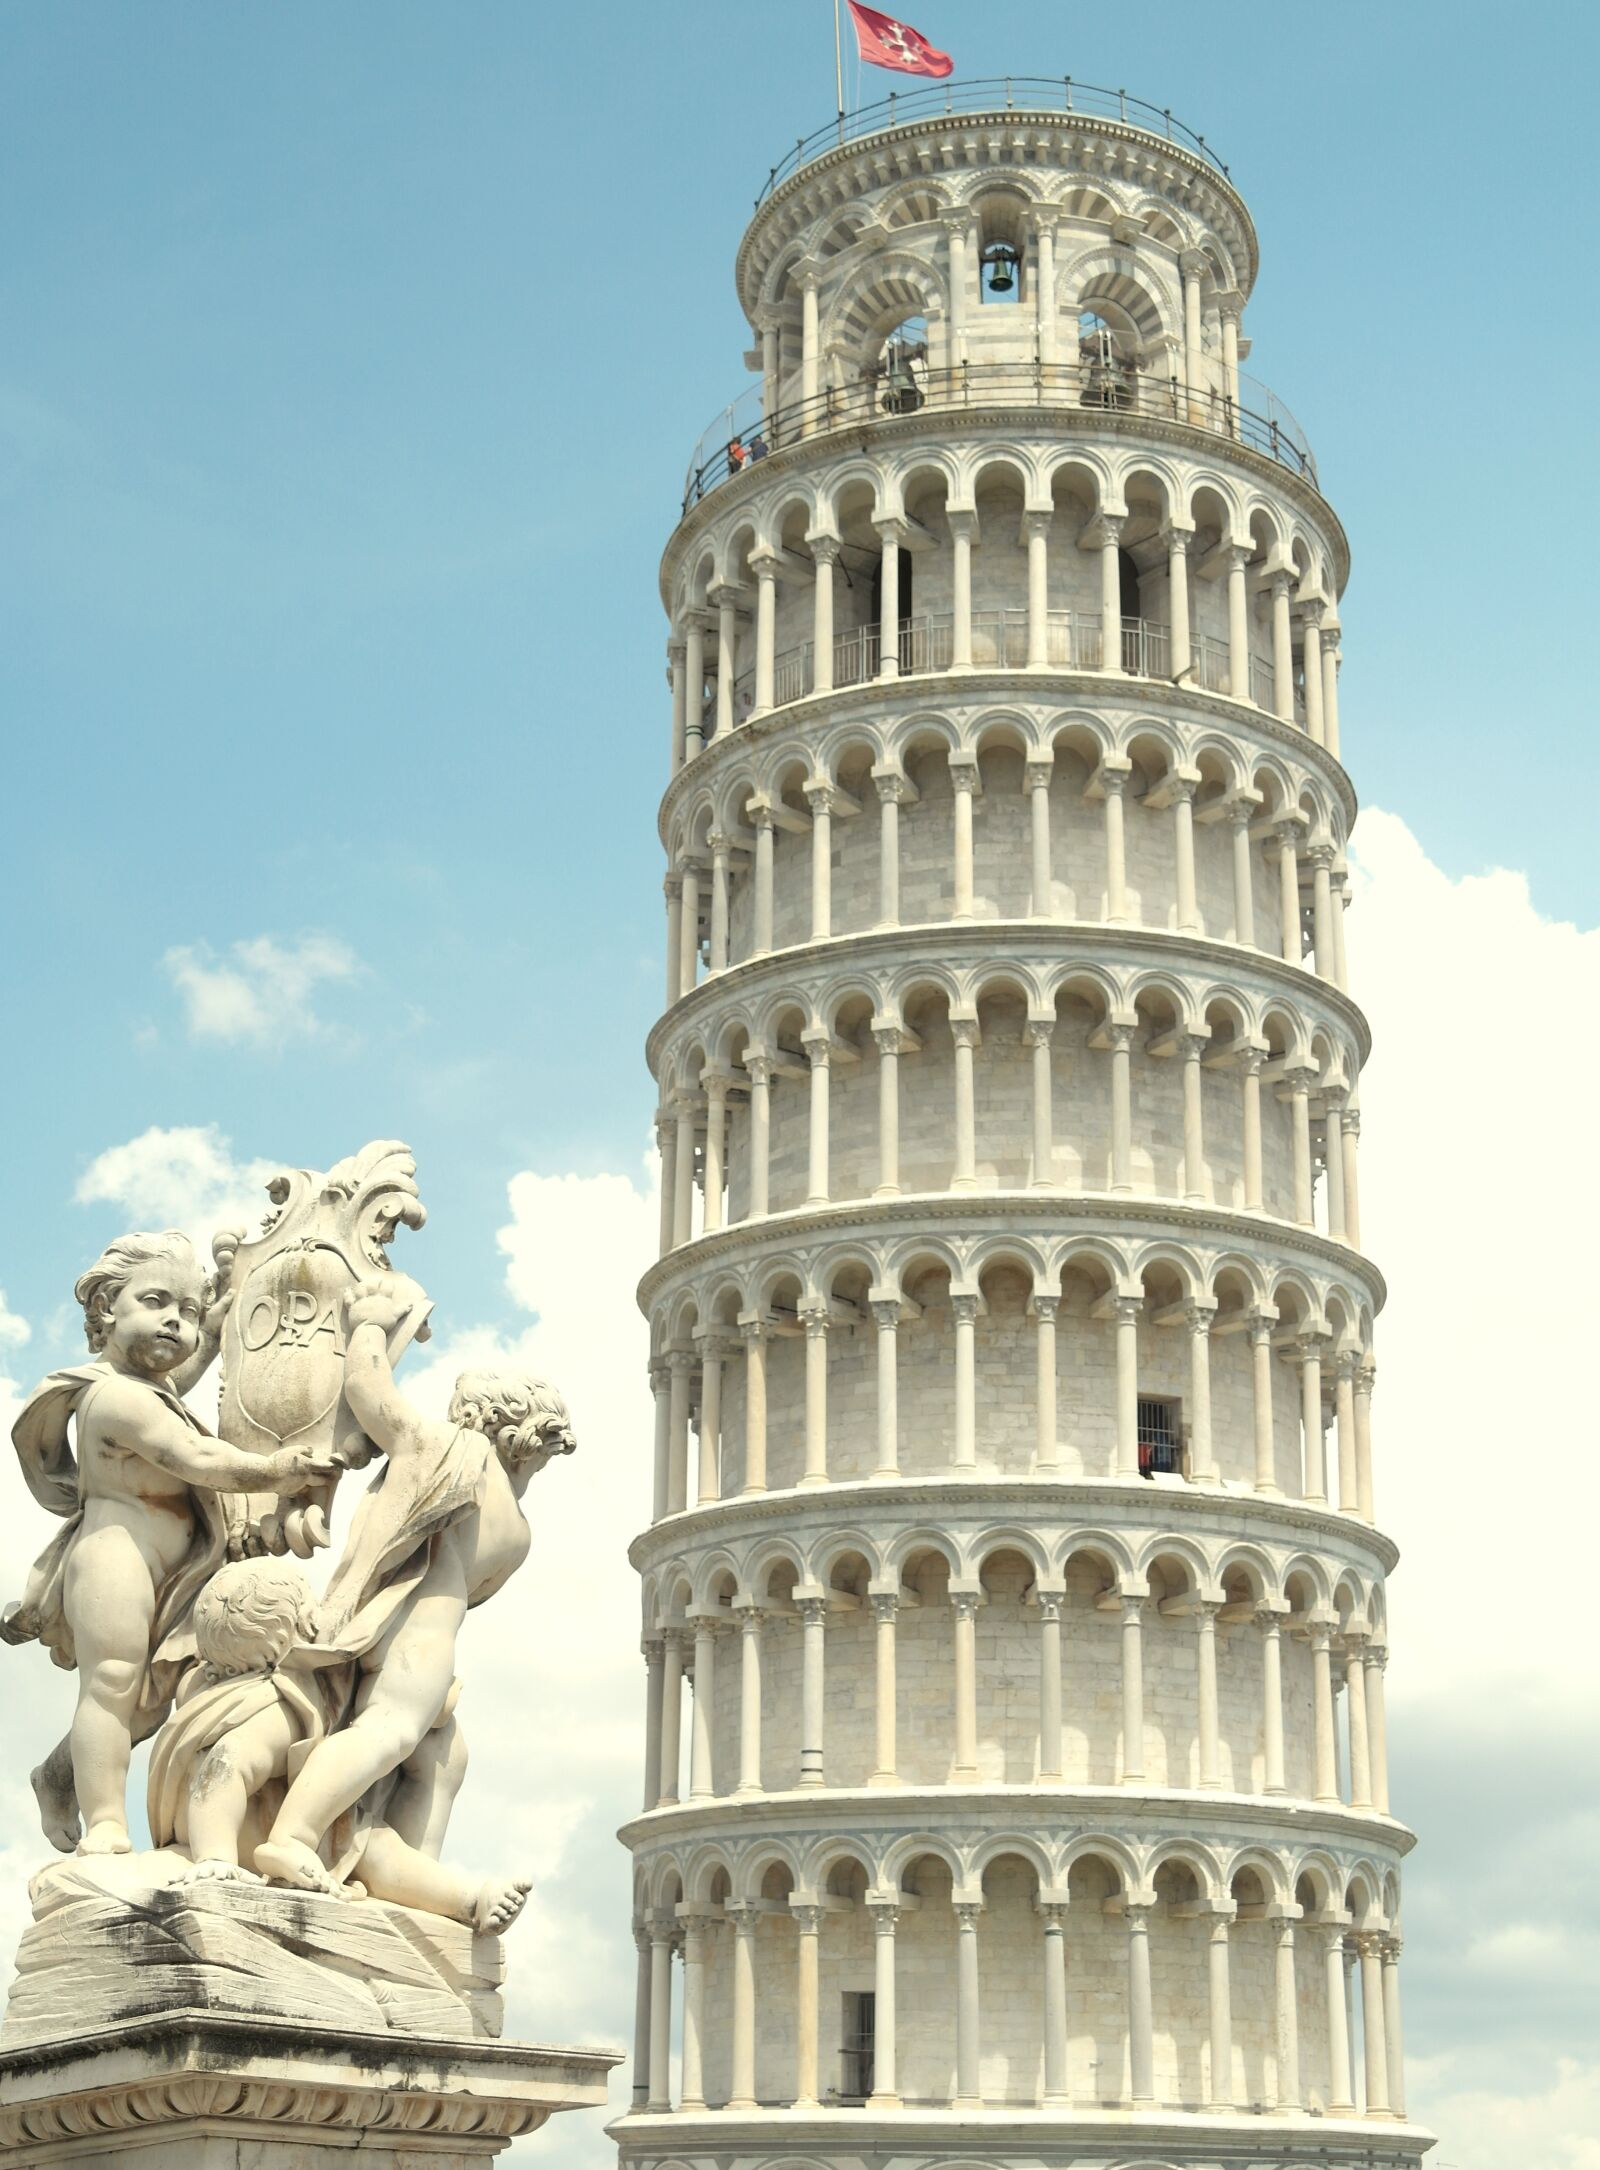 Samsung NX1100 sample photo. Tower of pisa, italy photography